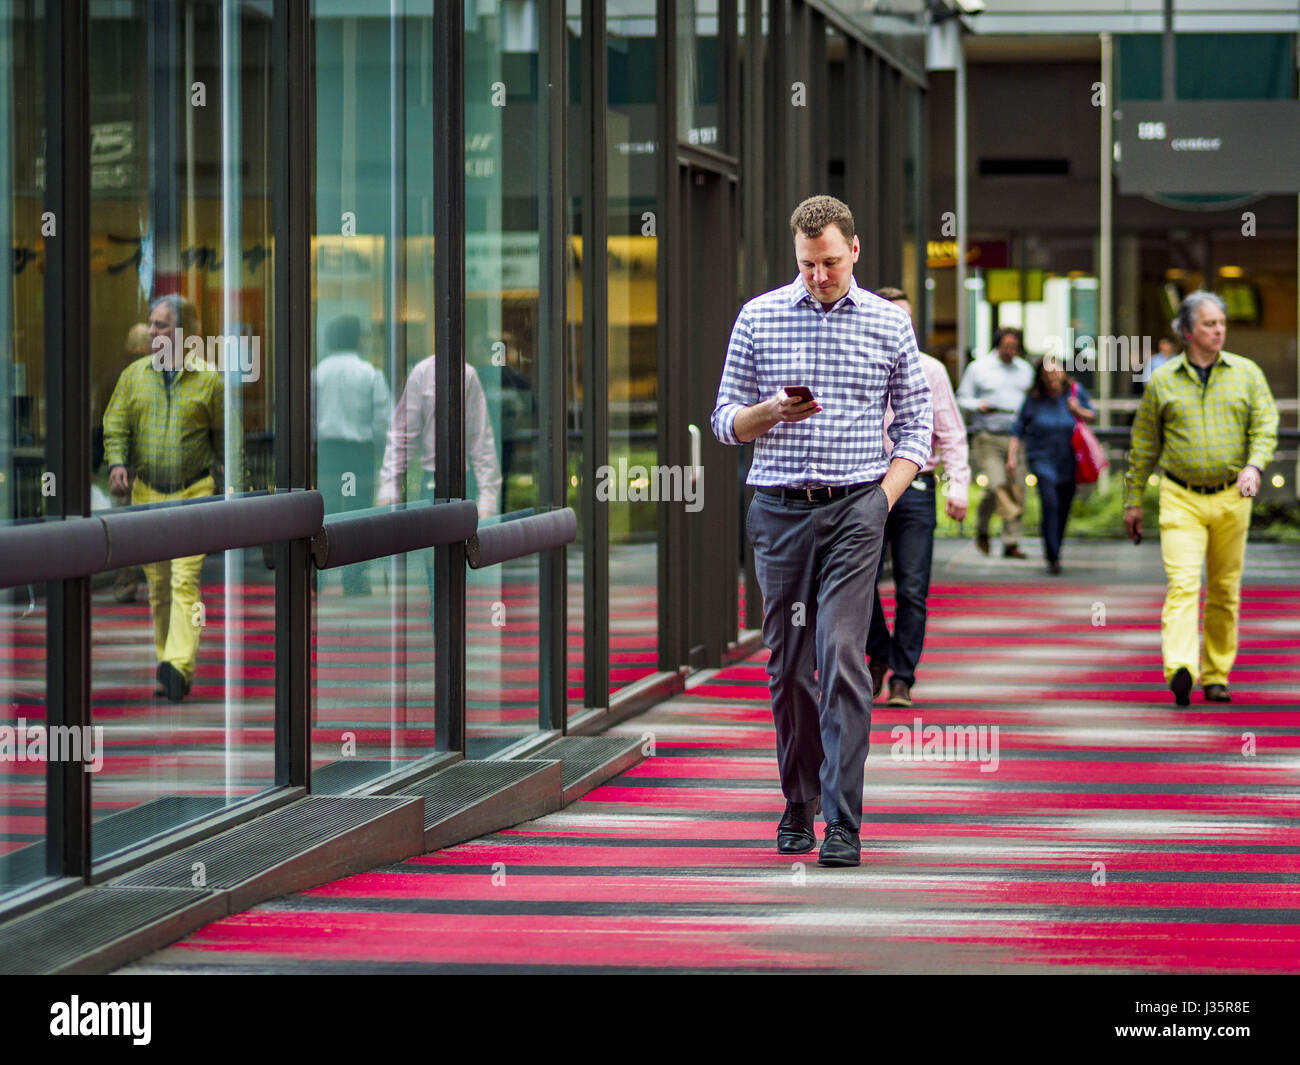 May 3, 2017 - Minneapolis, Minnesota, U.S - People going into the IDS Center, the hub of the Minneapolis skyway system. The skyways are enclosed pedestrian overpasses that connect downtown buildings. The Minneapolis Skyway was started in the early 1960s as a response to covered shopping malls in the suburbs that were drawing shoppers out of the downtown area. The system grew sporadically until 1974, when the construction of the IDS Center and its center atrium, called the Crystal Court, served as a hub for the downtown skyway system. There are 8 miles of skyways, connecting most of the downtow Stock Photo